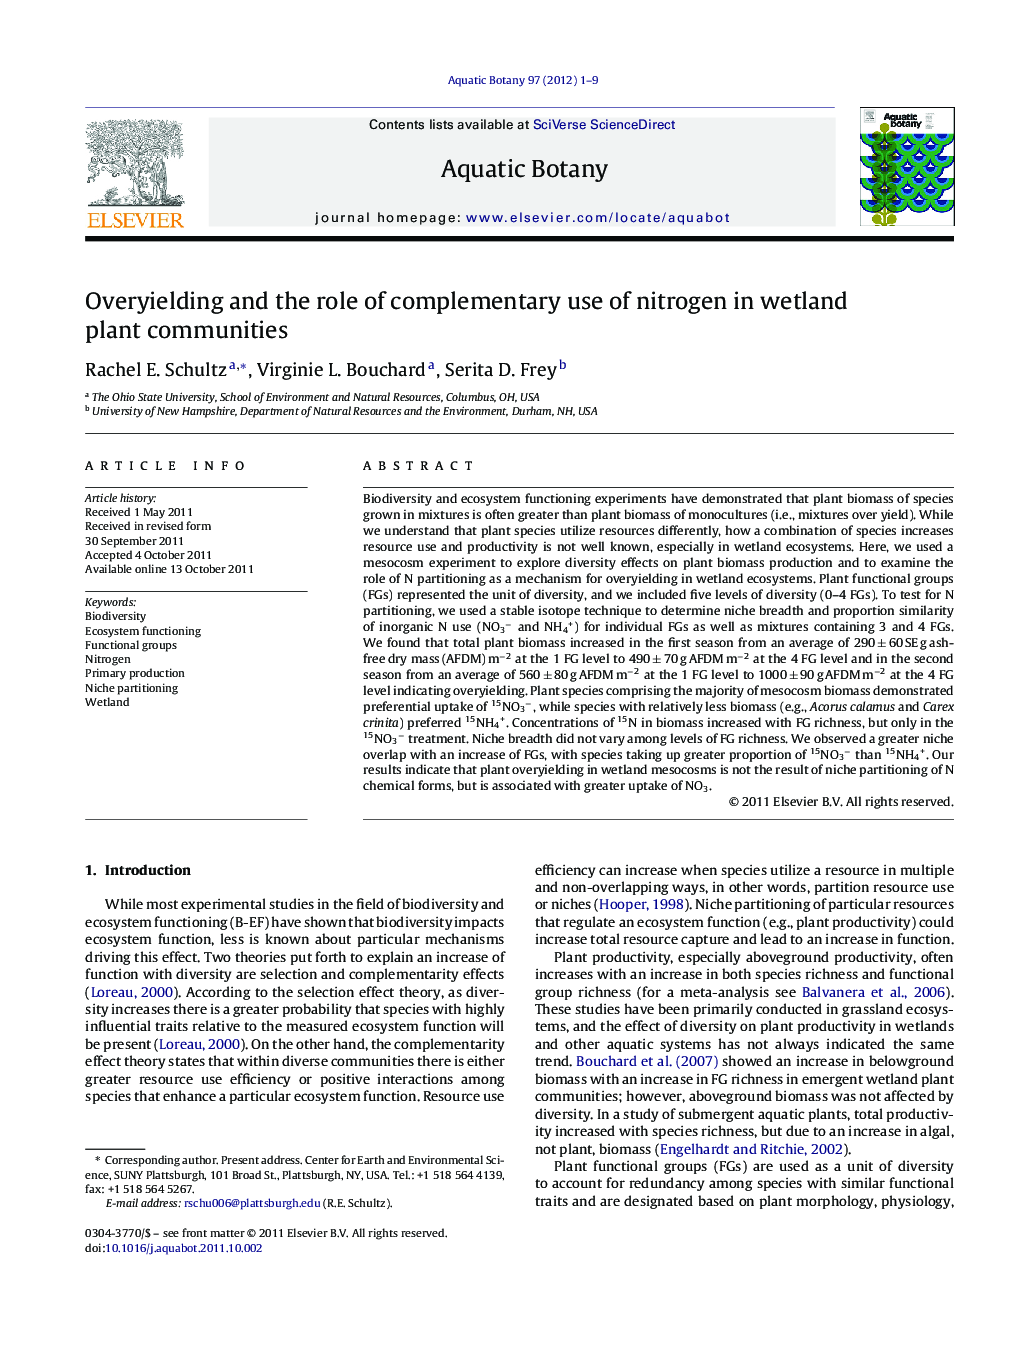 Overyielding and the role of complementary use of nitrogen in wetland plant communities